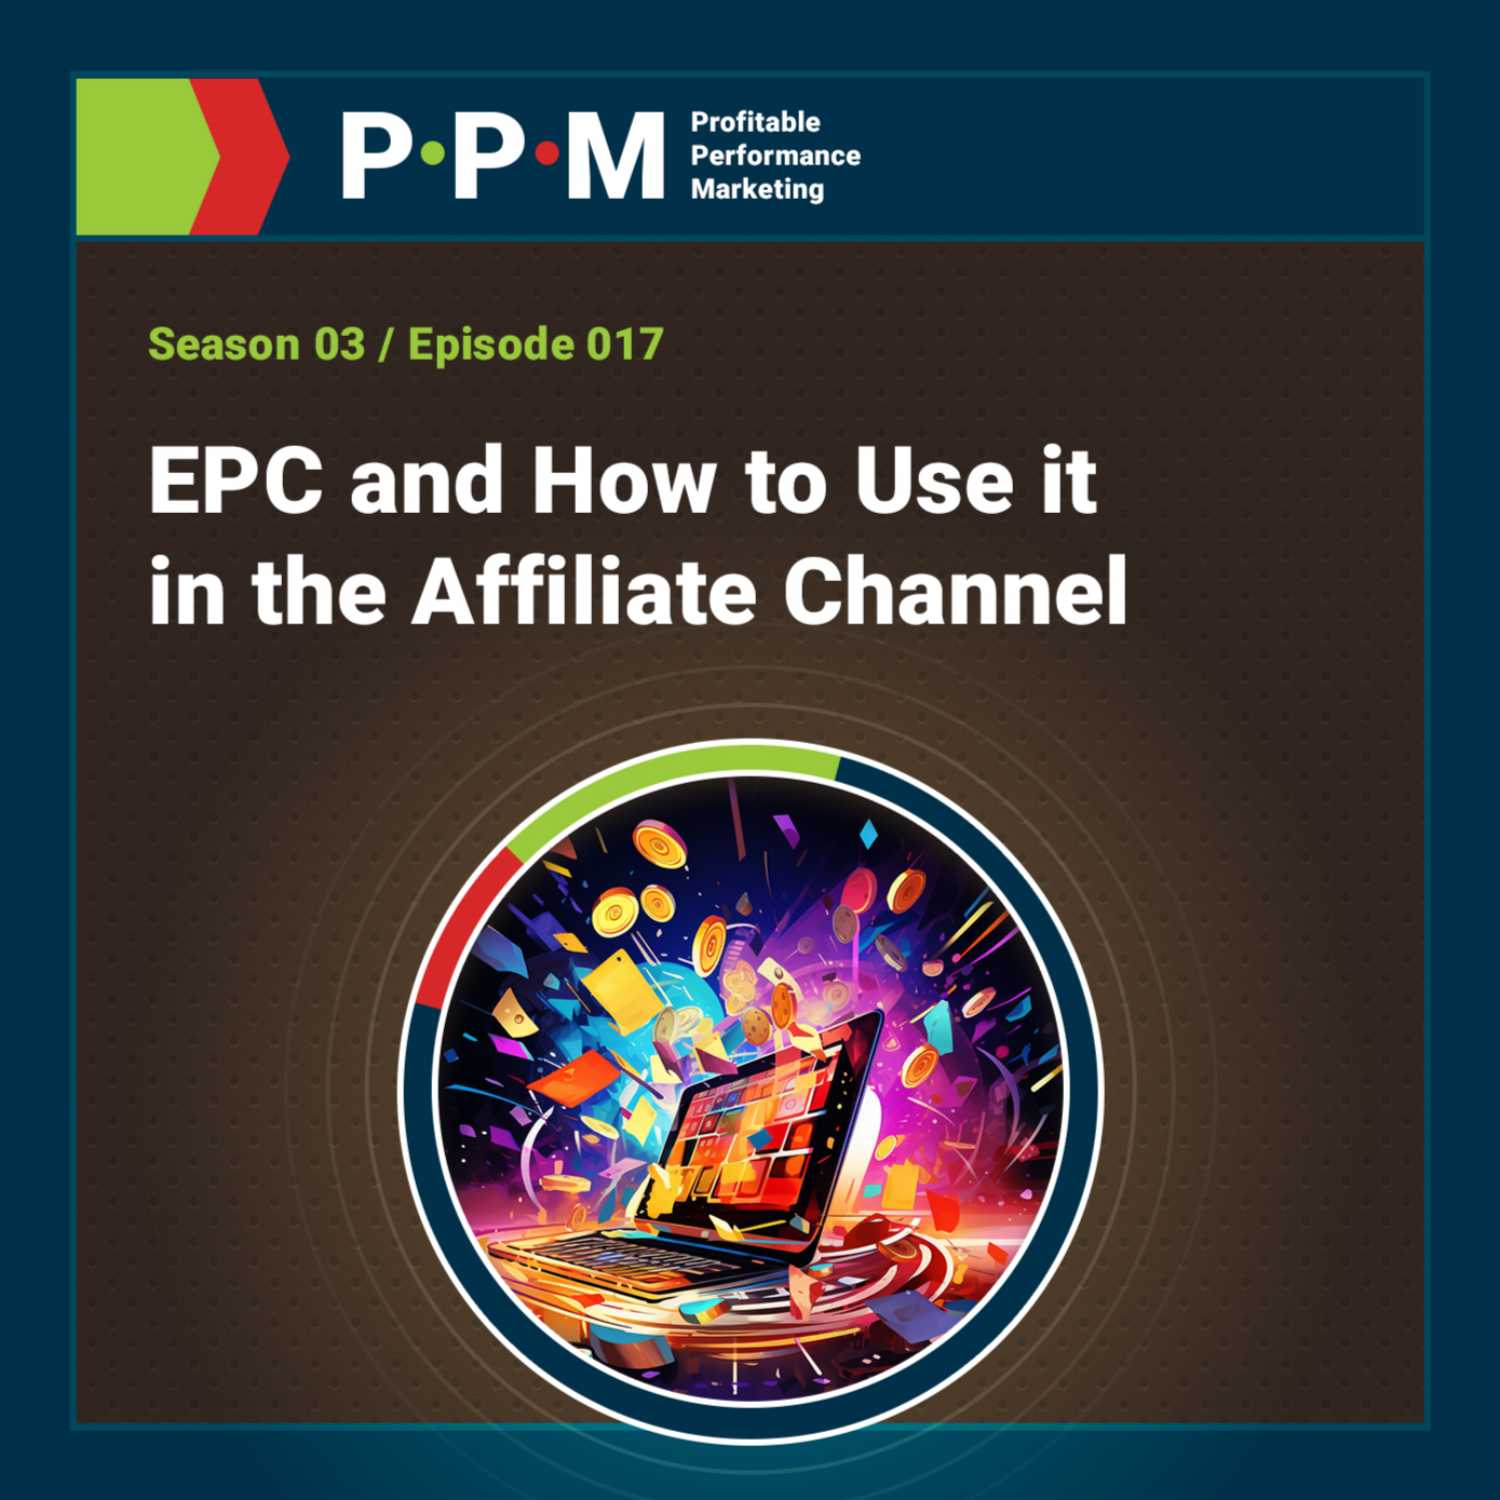 EPC and How to Use it in the Affiliate Channel